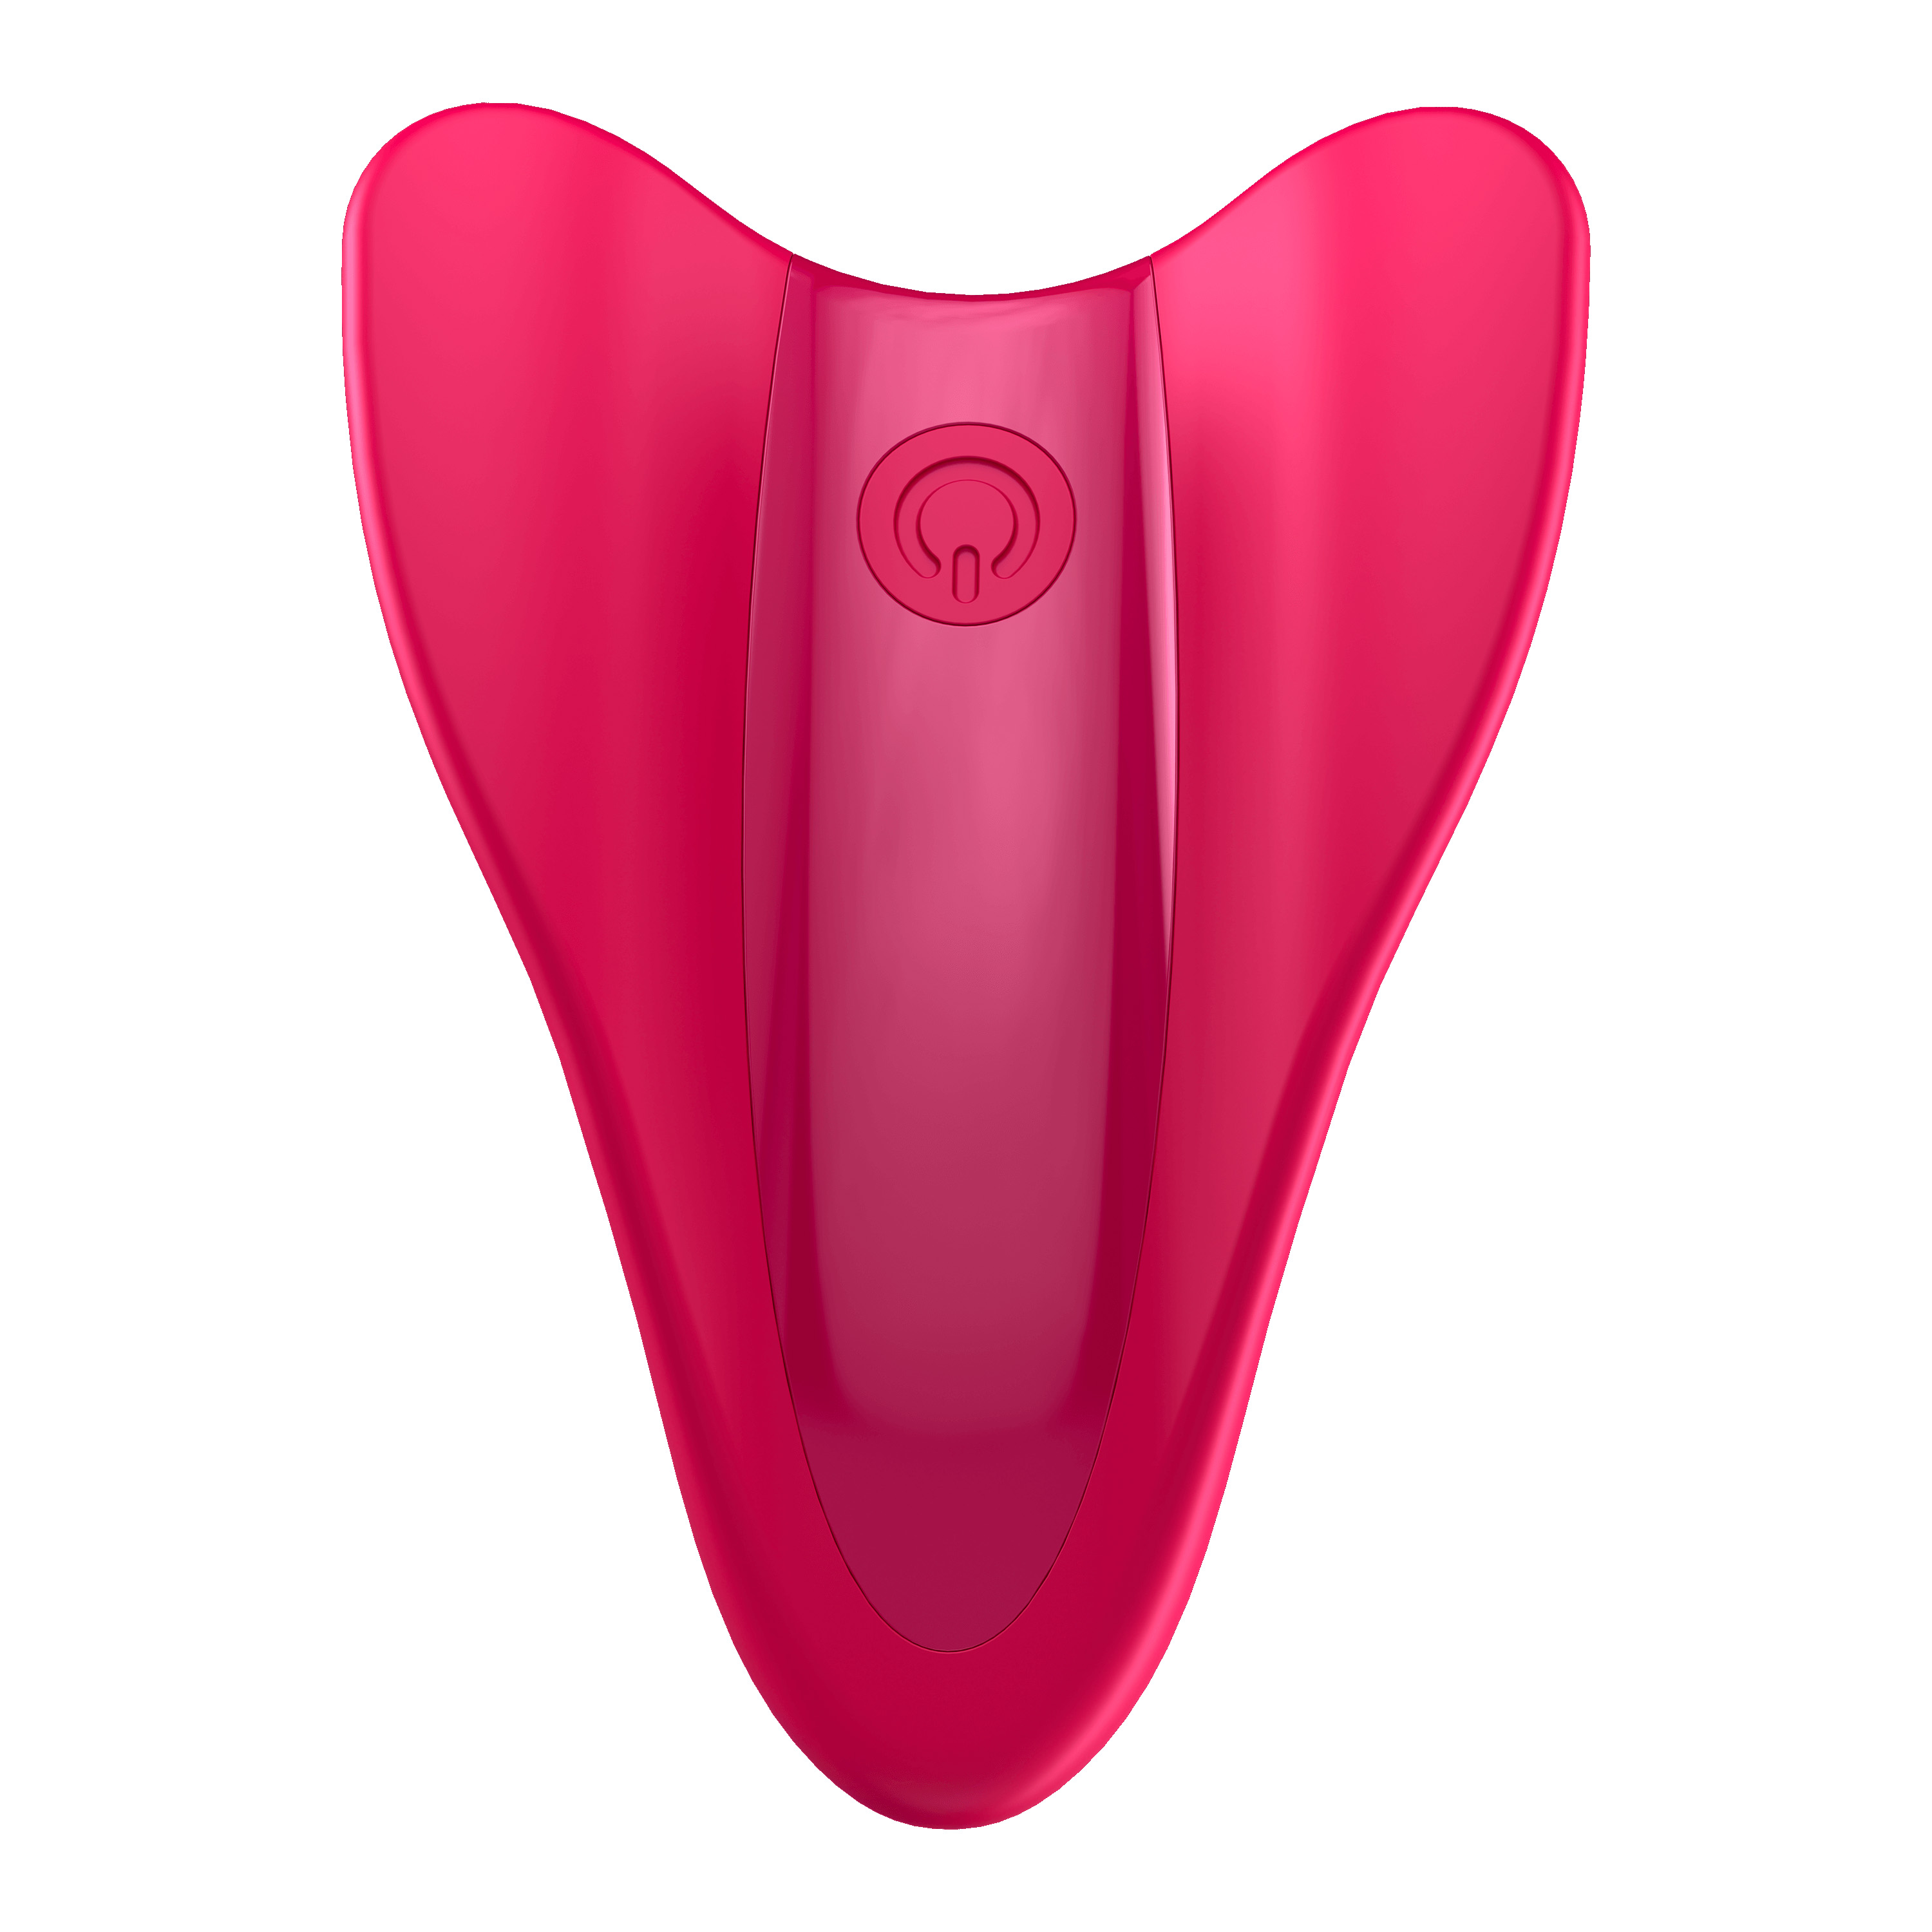 SATISFYER High Fly red